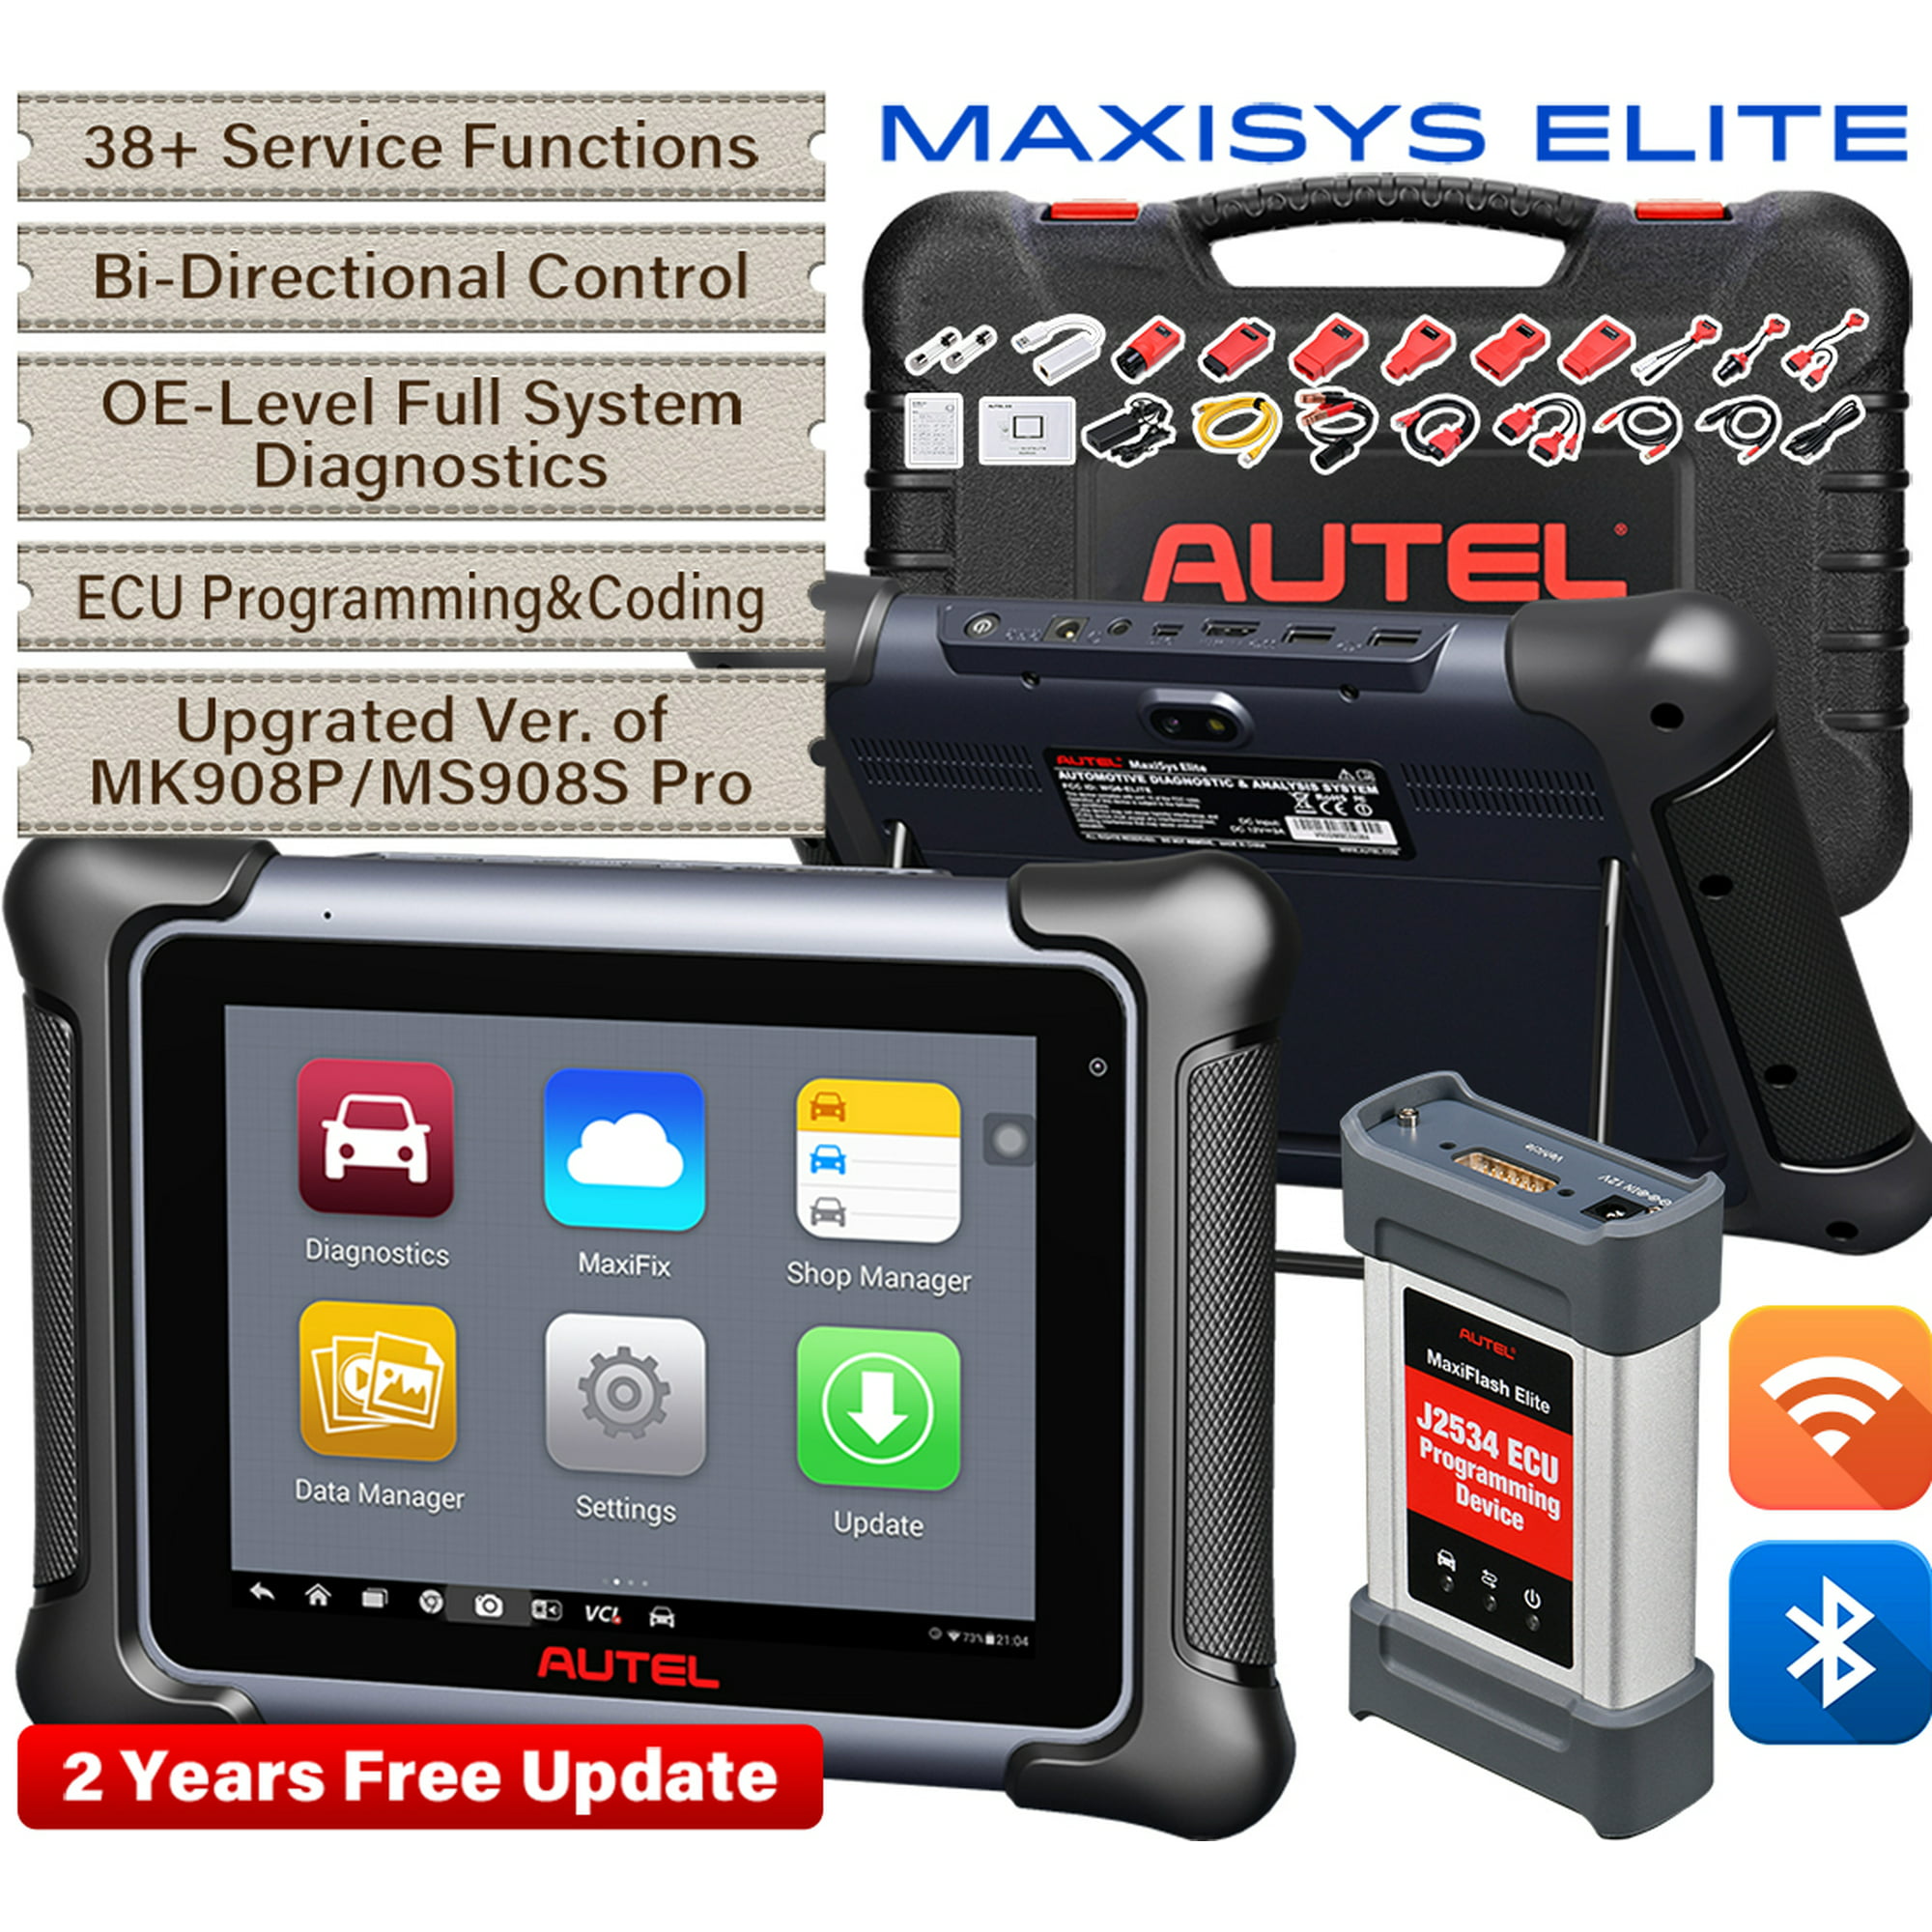 North America marathon punch Autel Maxisys Elite Car Diagnostic Scan Tool with J2534 ECU Programming &  Coding, 38+ Service 2 Years Free Update Upgraded of MS908S Pro/MK908P -  Walmart.com